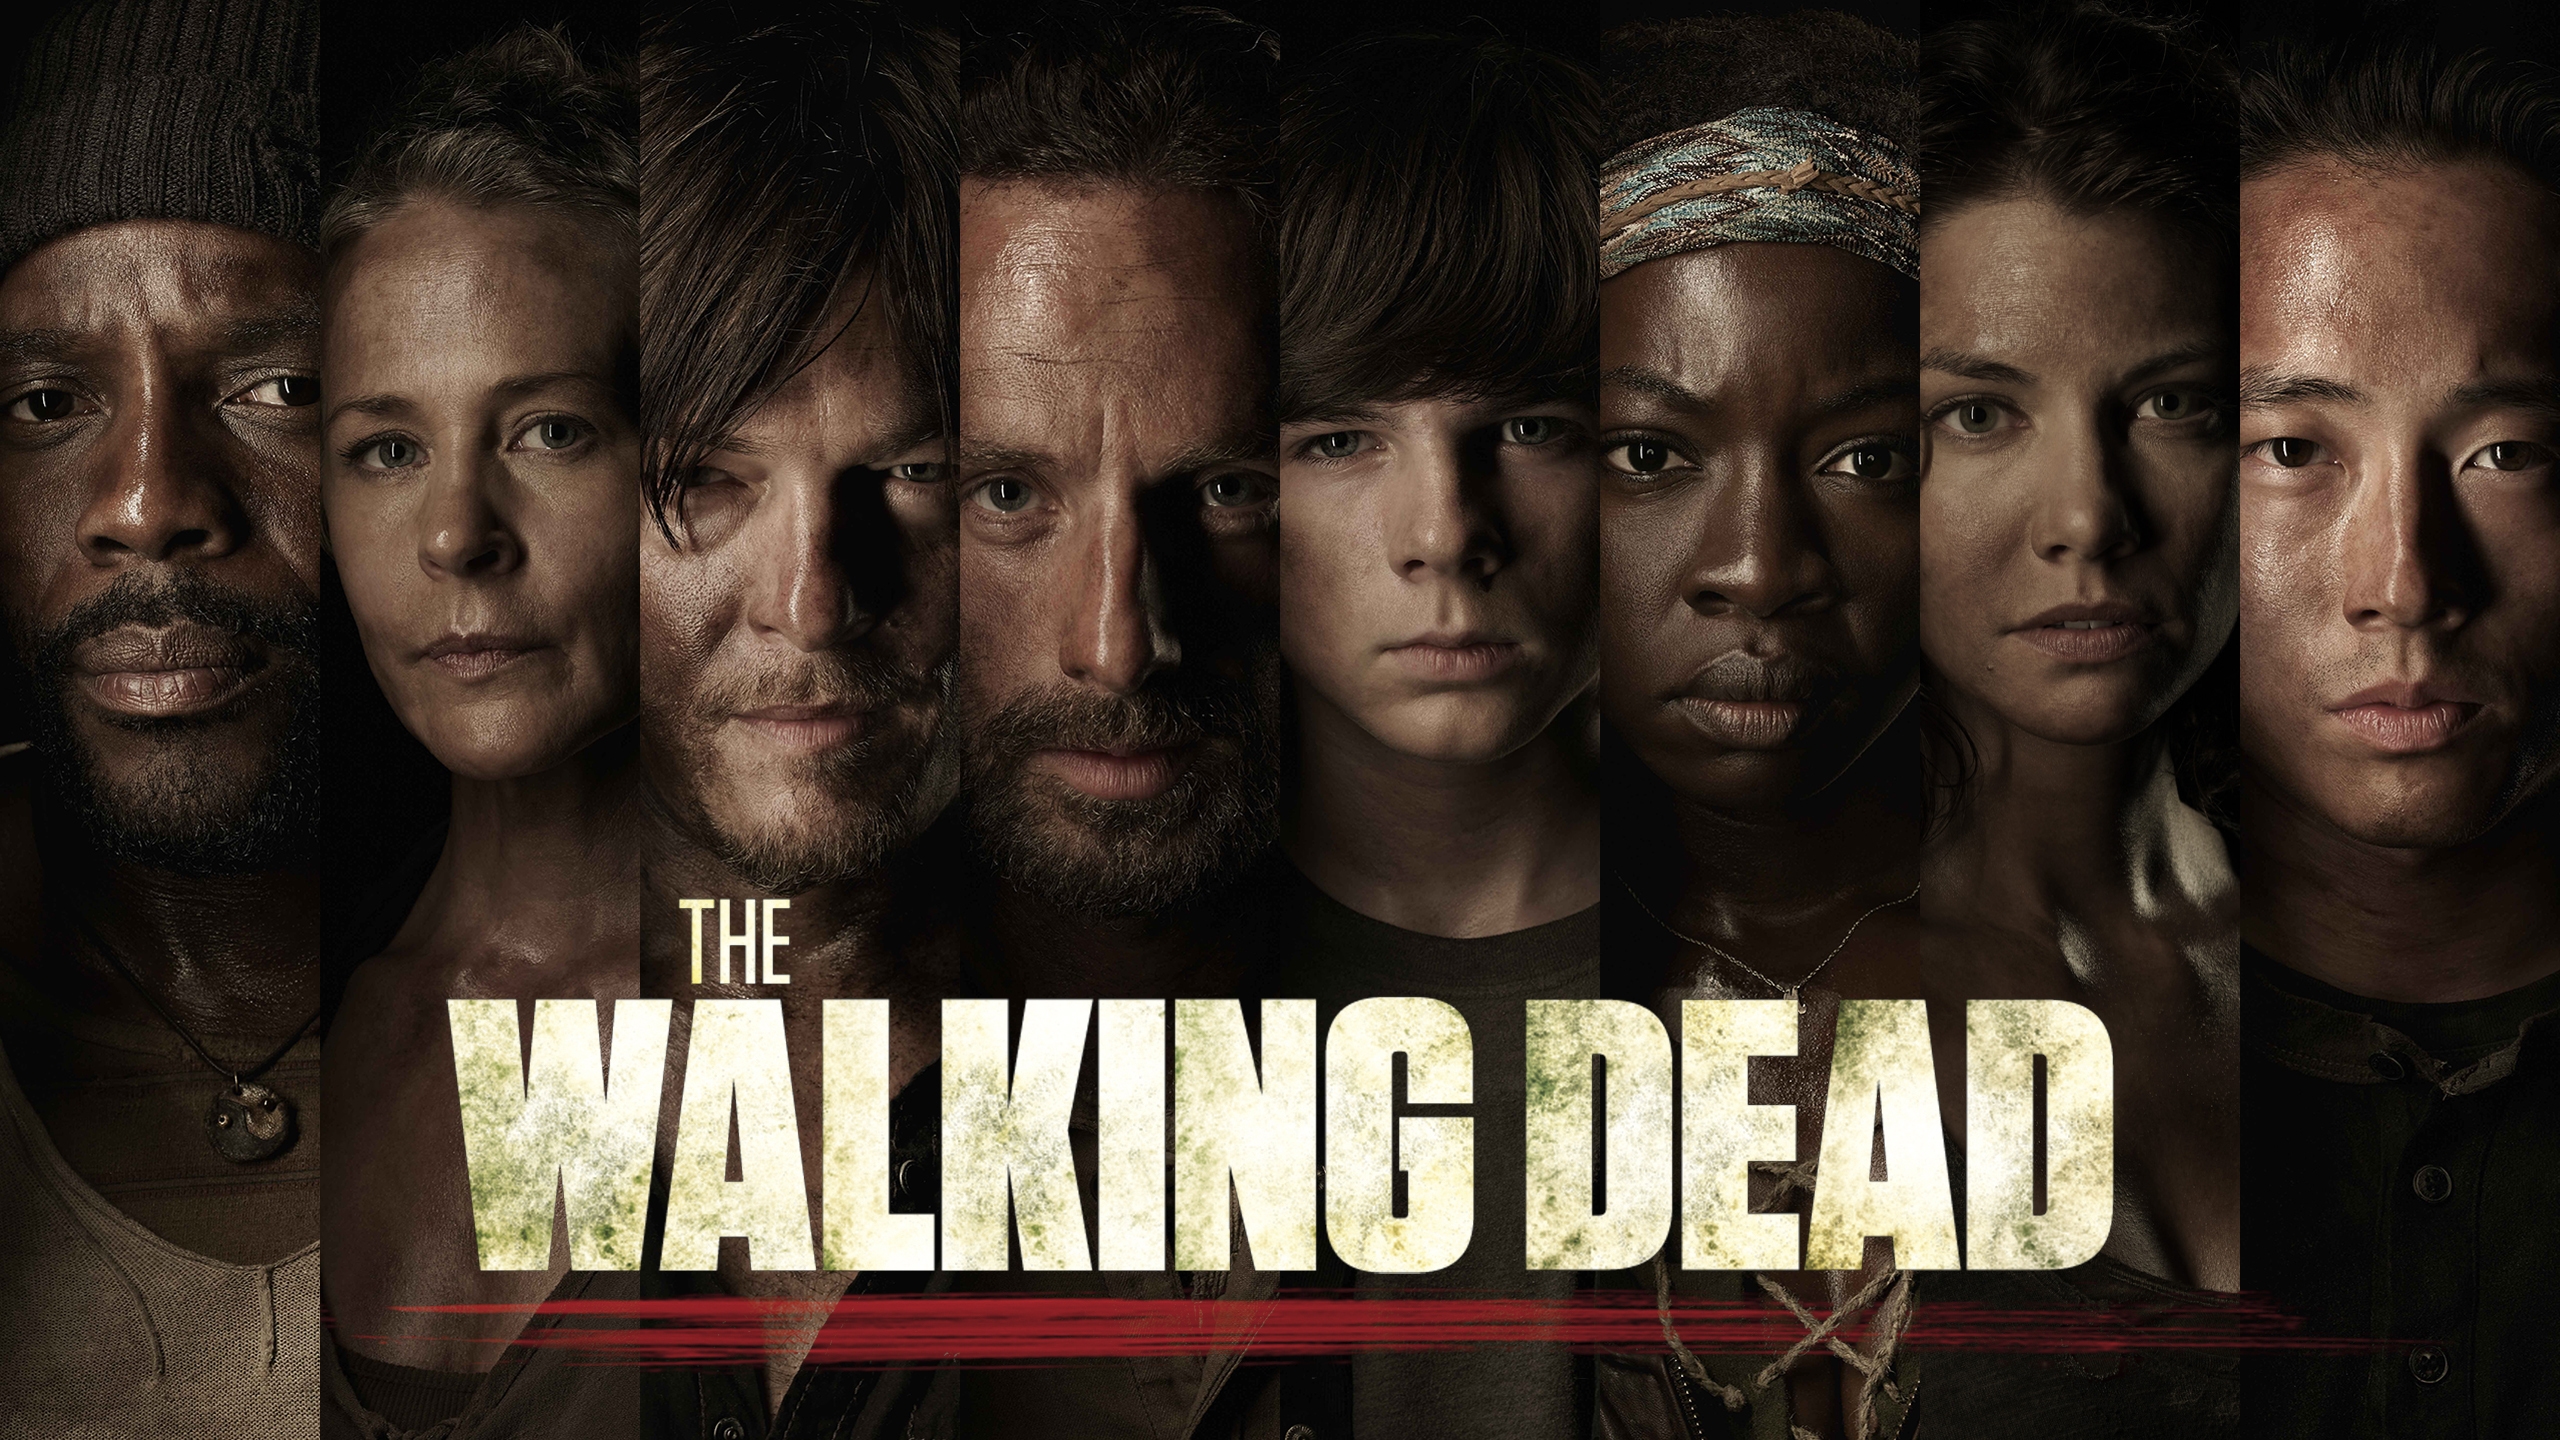 The Walking Dead for 2560x1440 HDTV resolution